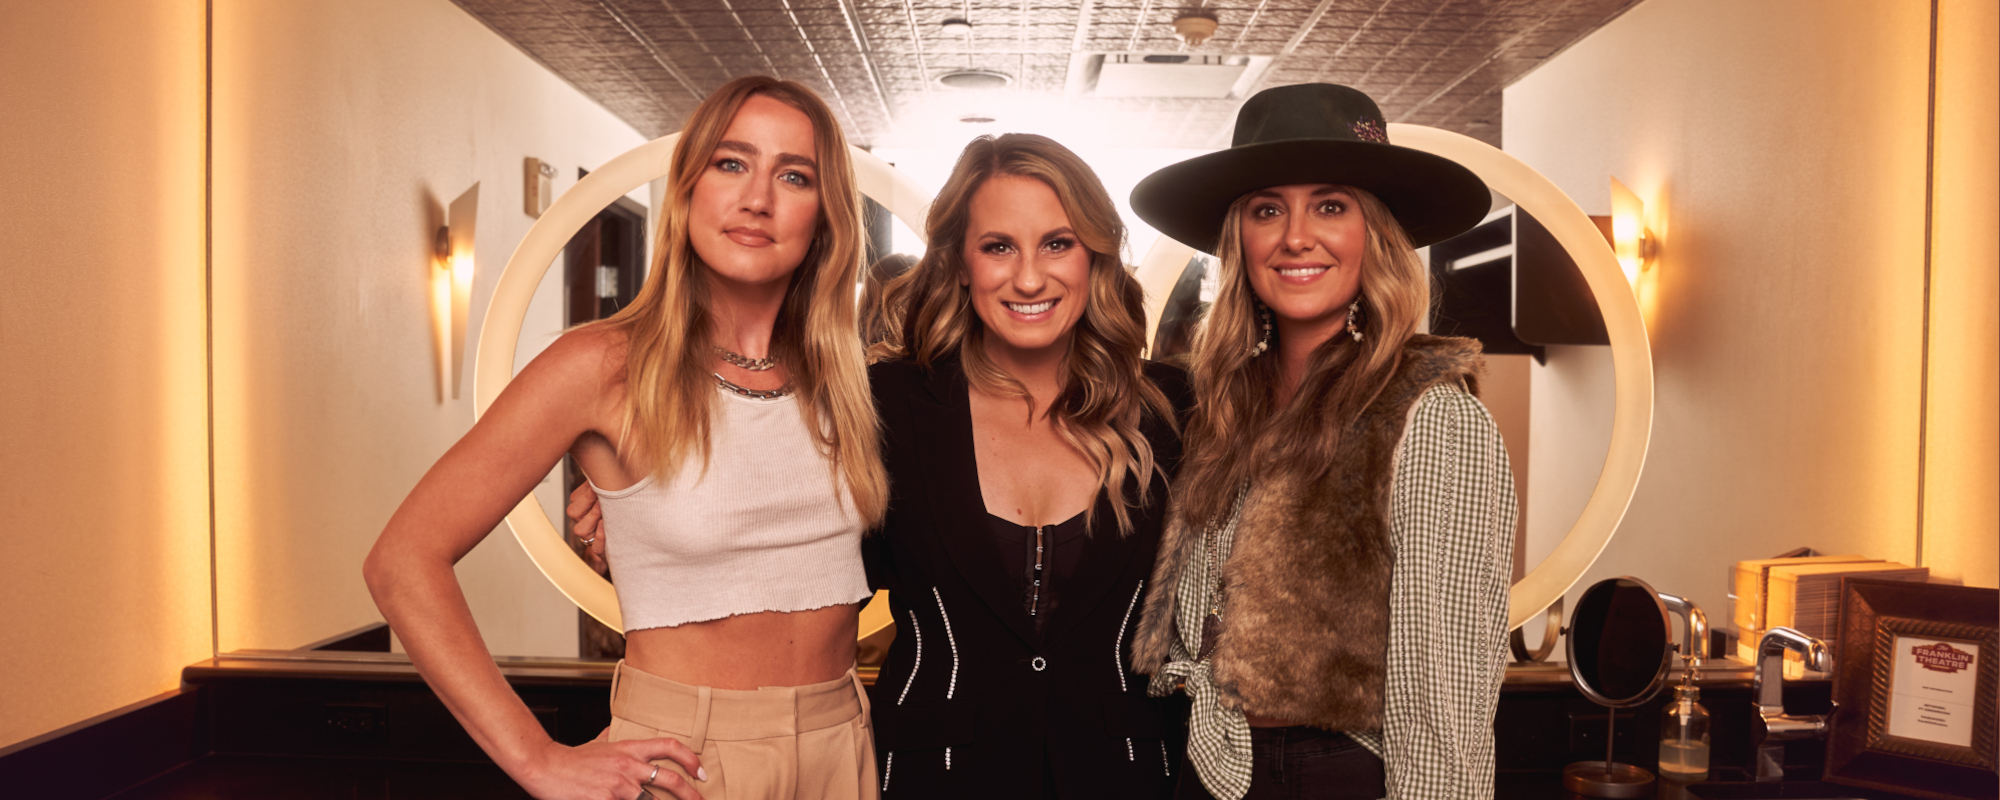 Ingrid Andress, Caitlyn Smith, and Lainey Wilson Prove Country Music is in Good Hands